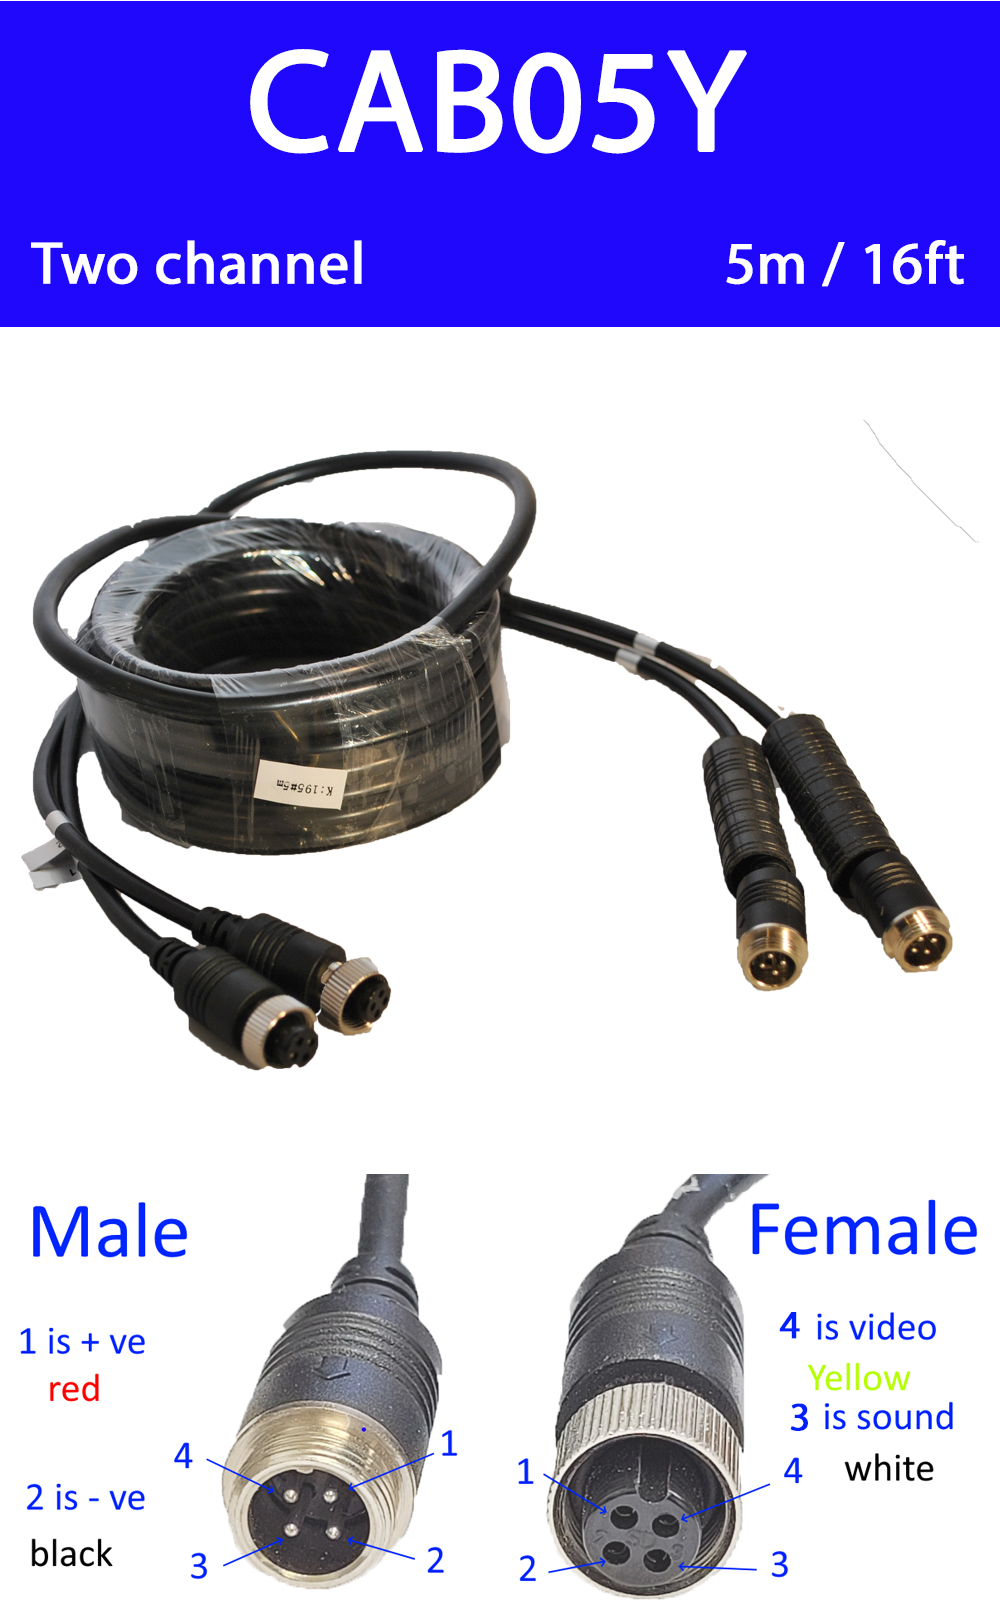 5m 4 pin reversing camera Y extension cable